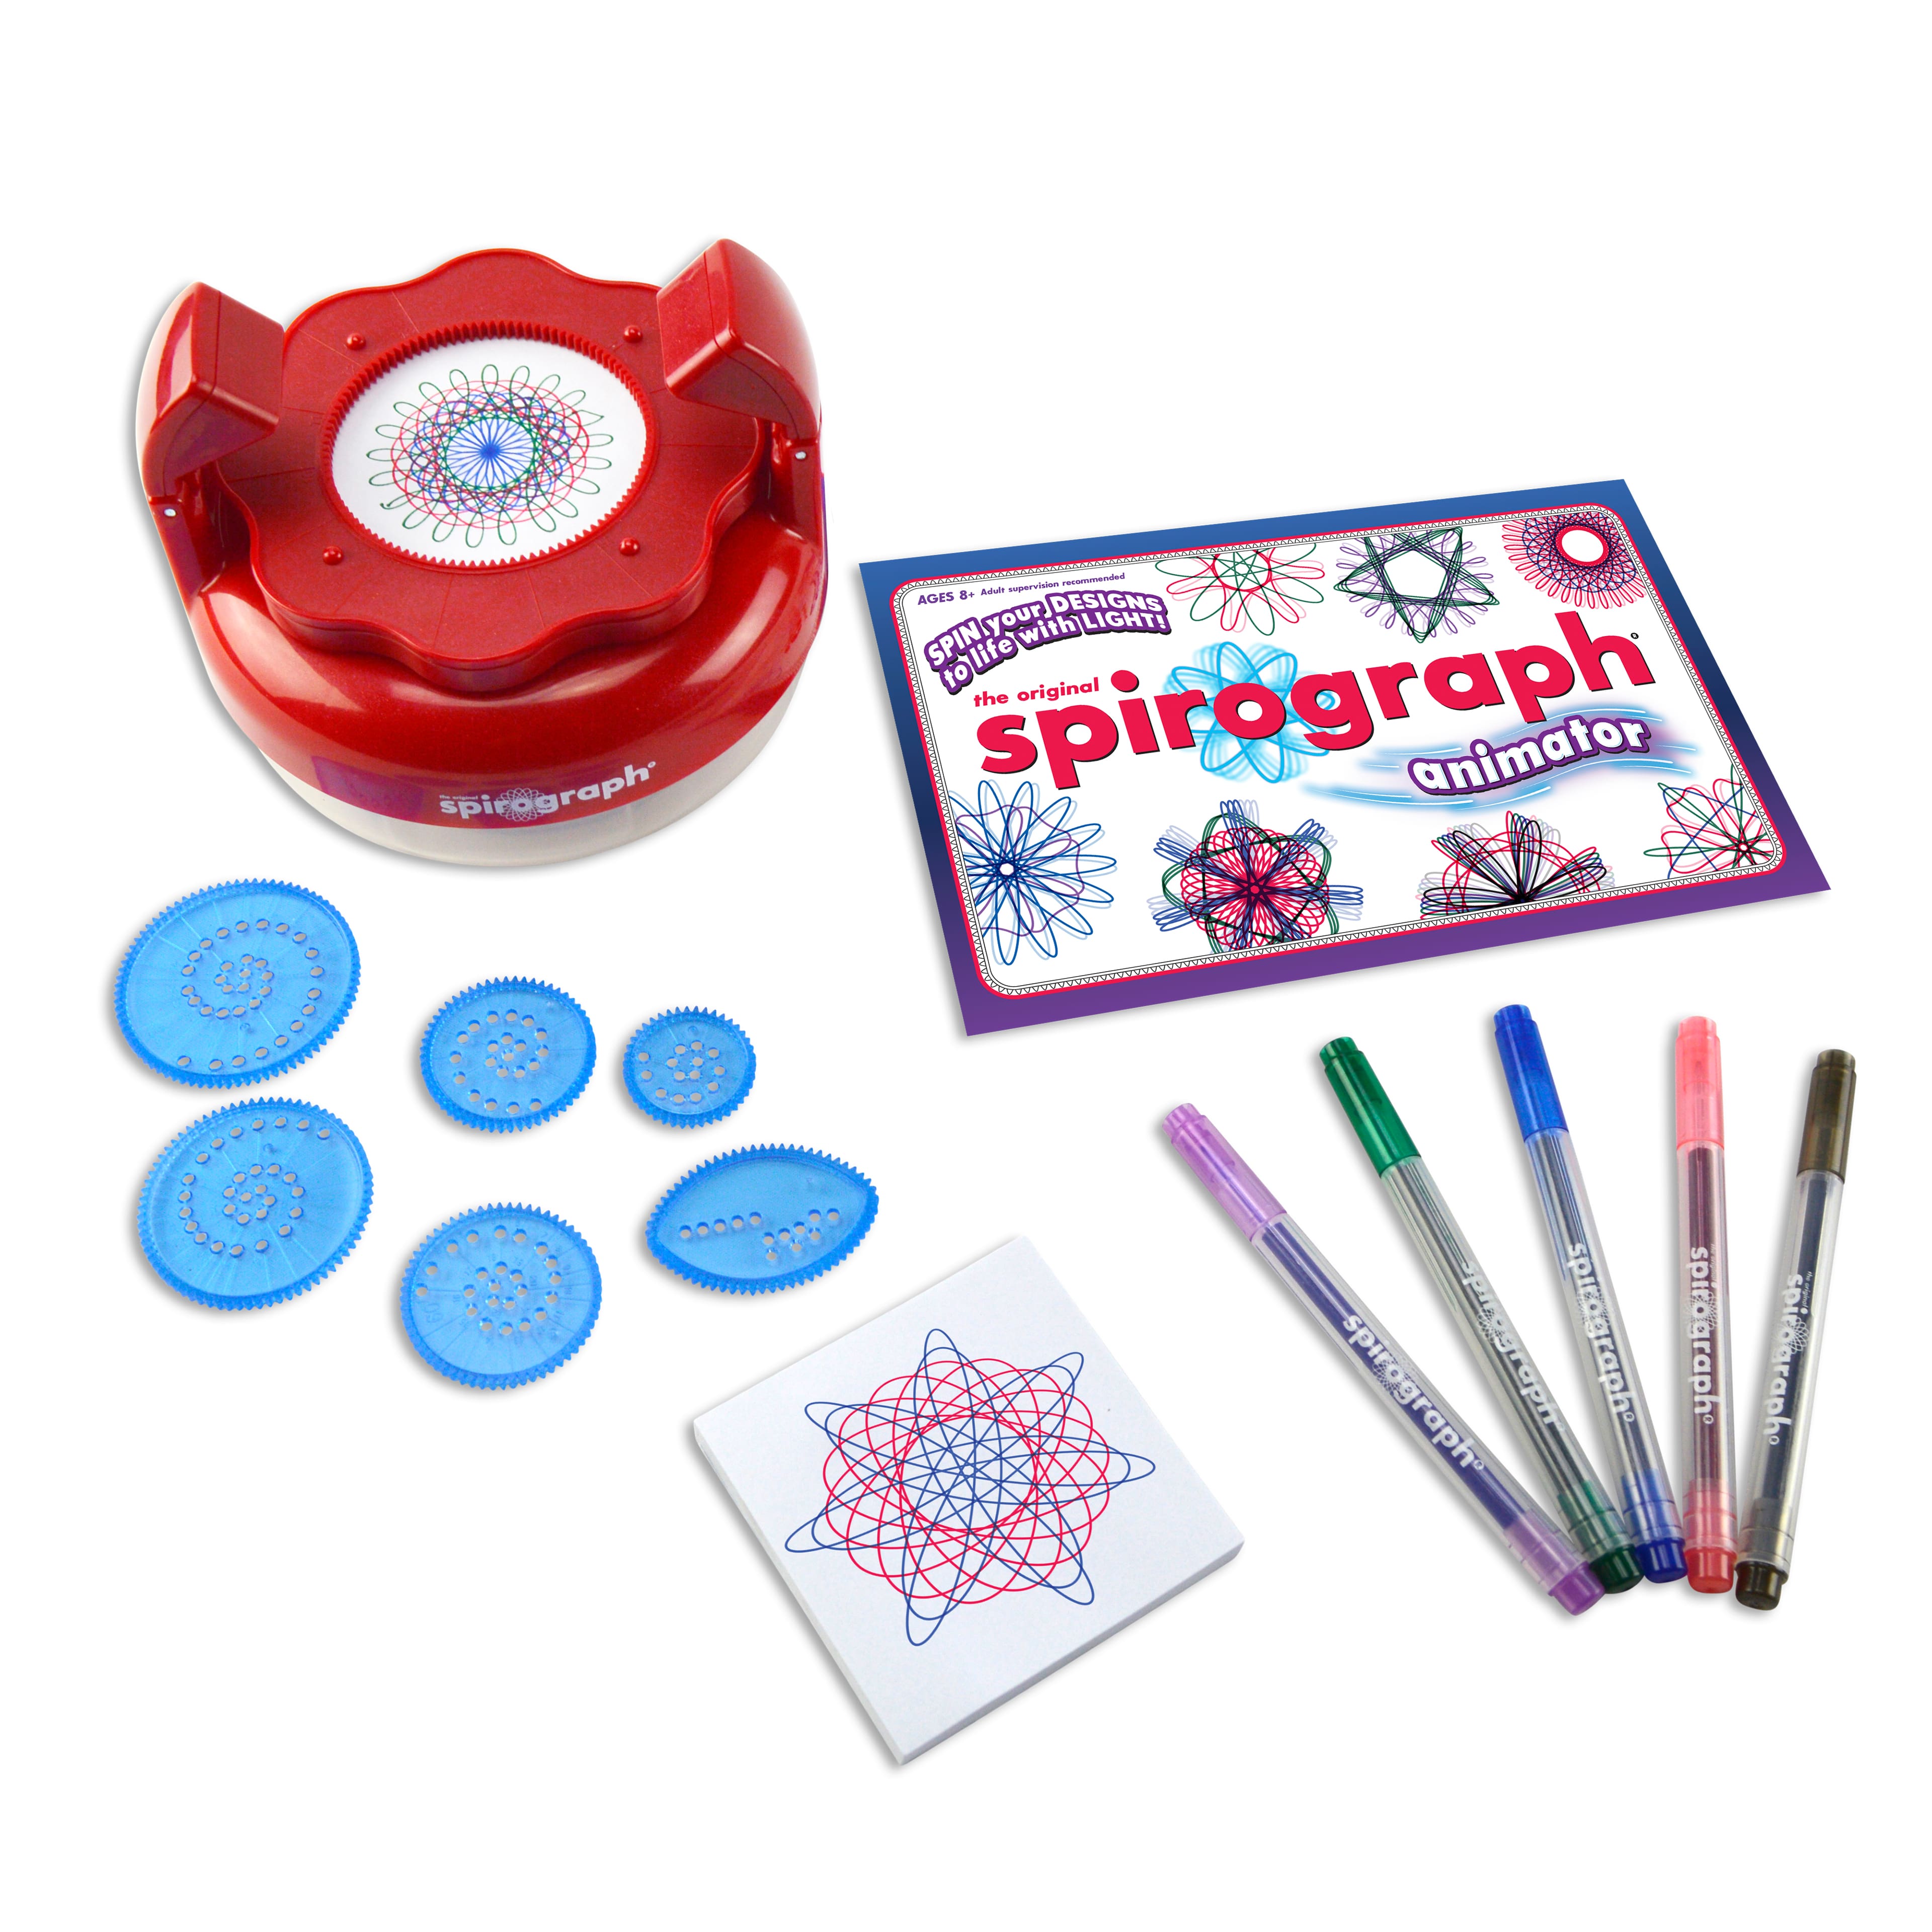 Spirograph Animator -- Create Amazing 3D Designs with Lights and Spinning Action - image 5 of 10